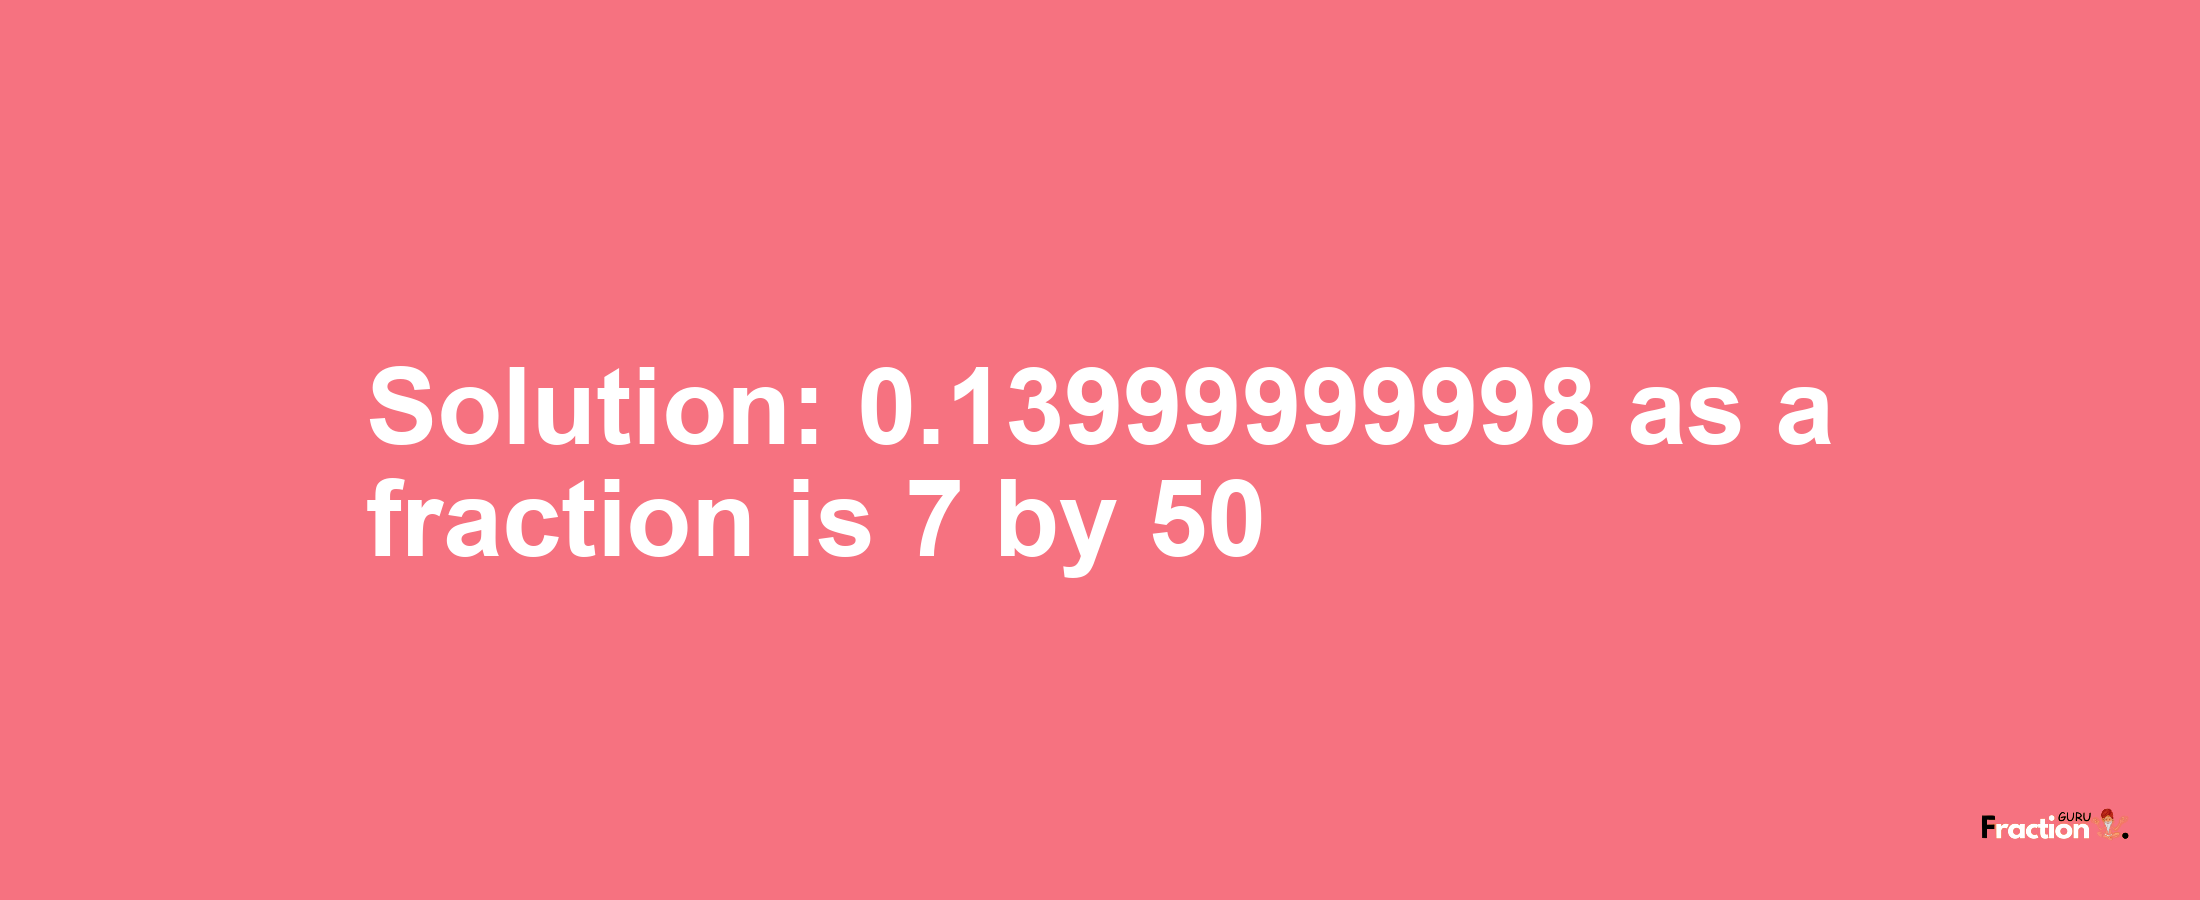 Solution:0.13999999998 as a fraction is 7/50